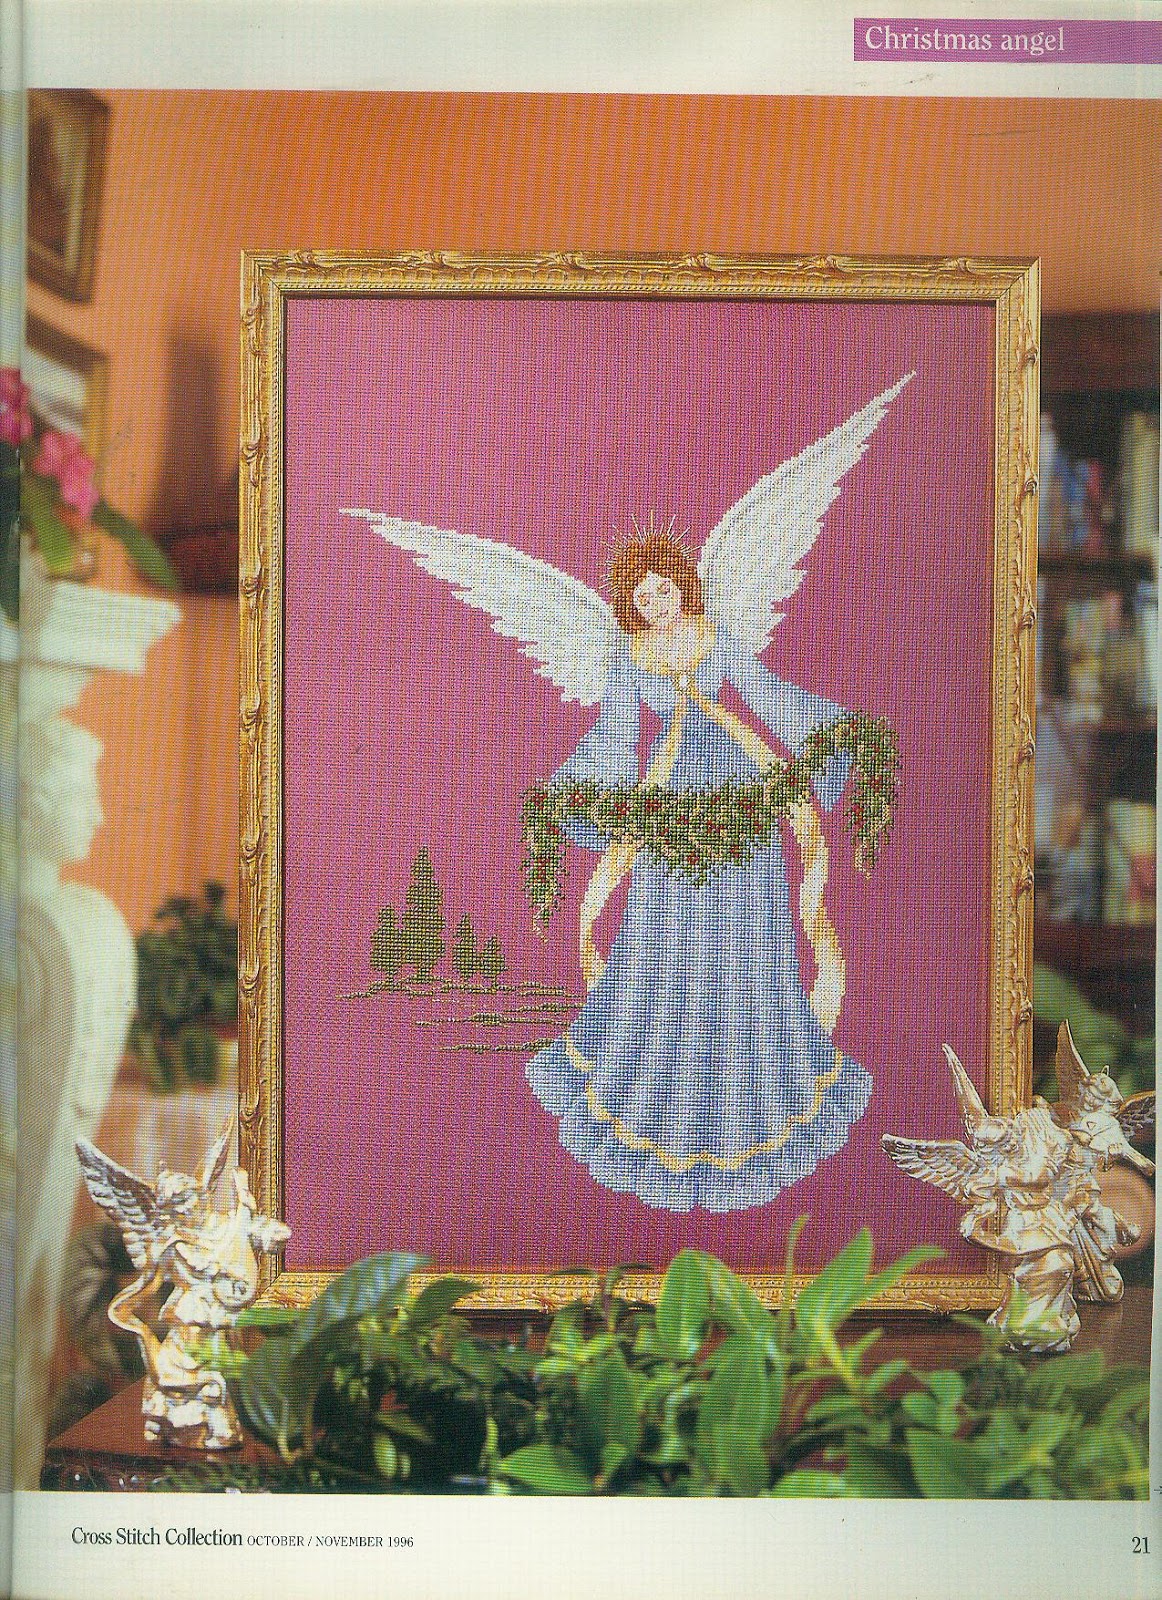 Collection 26. Отшив Крисмас ангелс 1992 года. 2005 Christmas Angel вышитые работы фото.